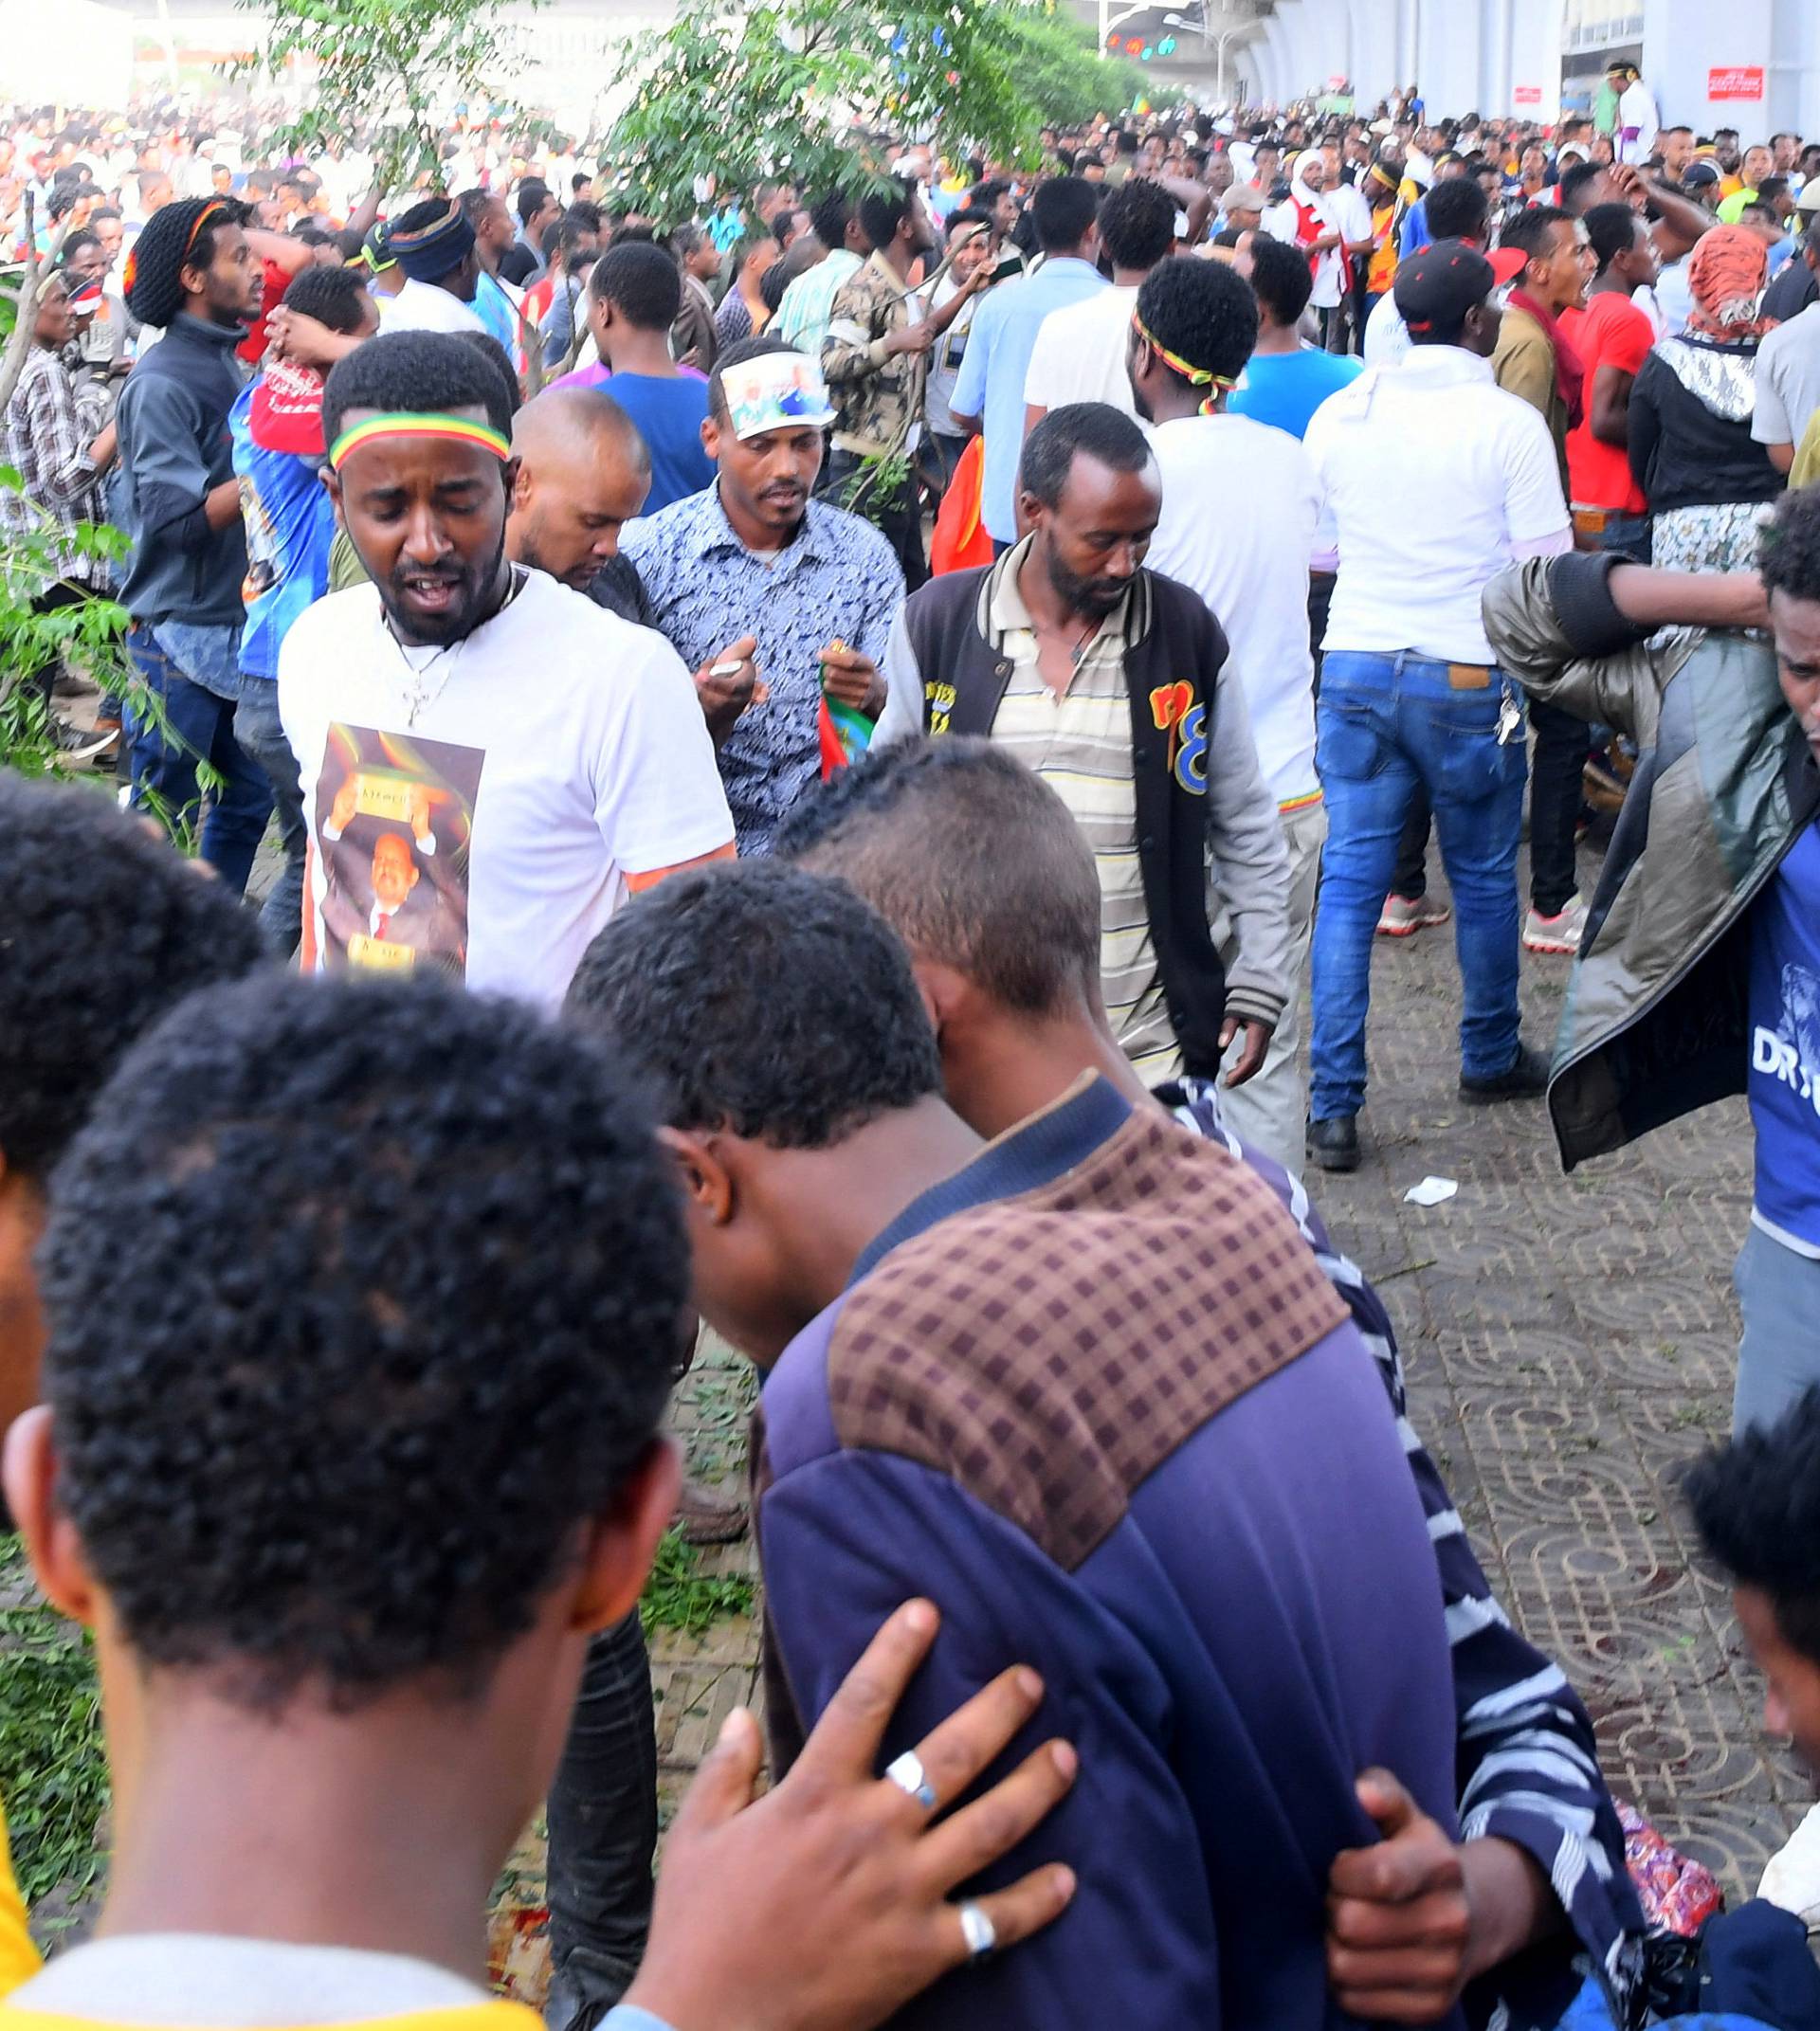 Ethiopians react after an explosion during a rally in support of the new Prime Minister Abiy Ahmed in Addis Ababa